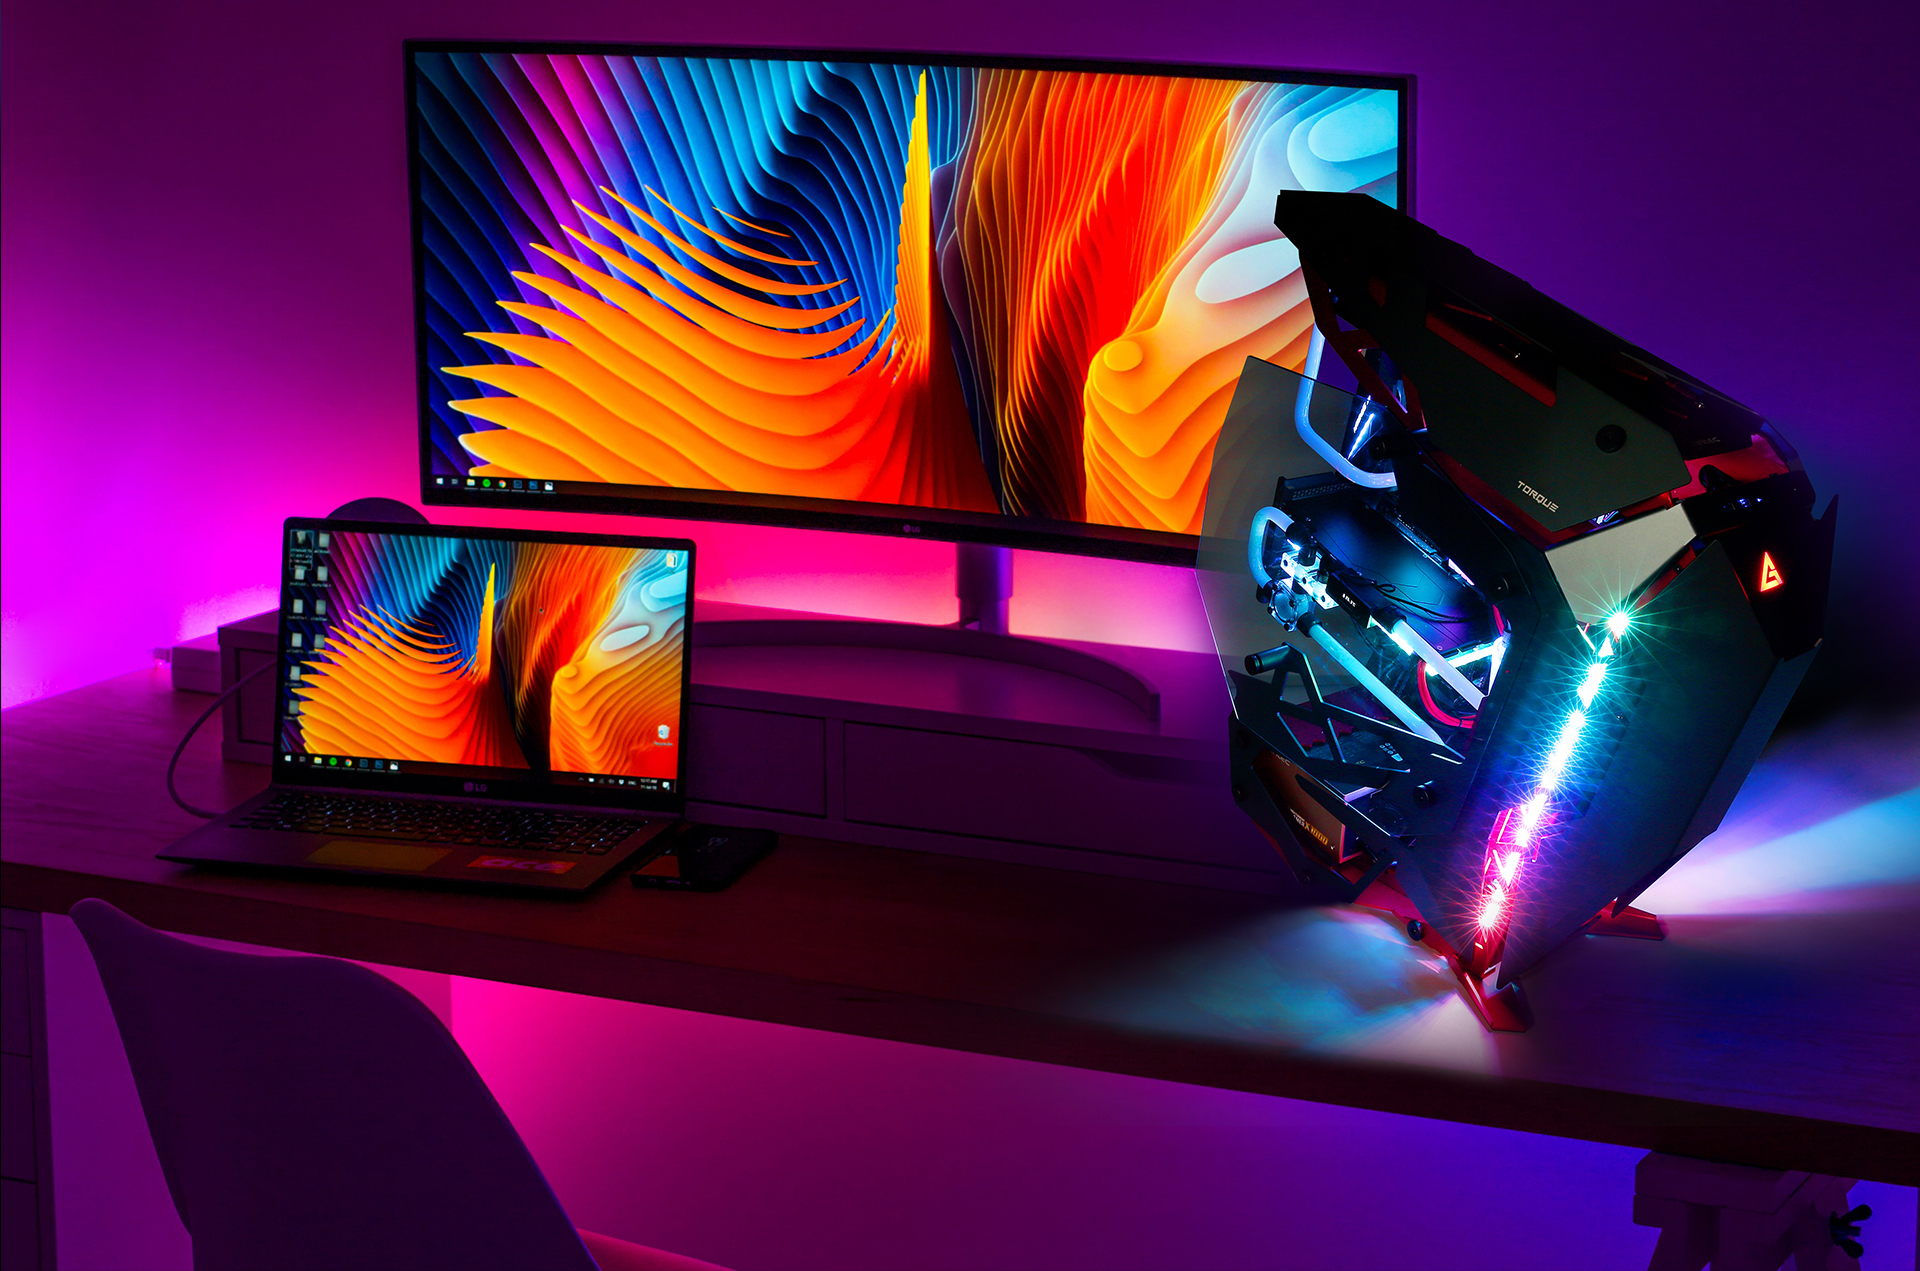 Antec TORQUE on a desk with a laptop plugged into a wide-view monitor, both screens show a blue and orange graphic that looks like an electric canyon